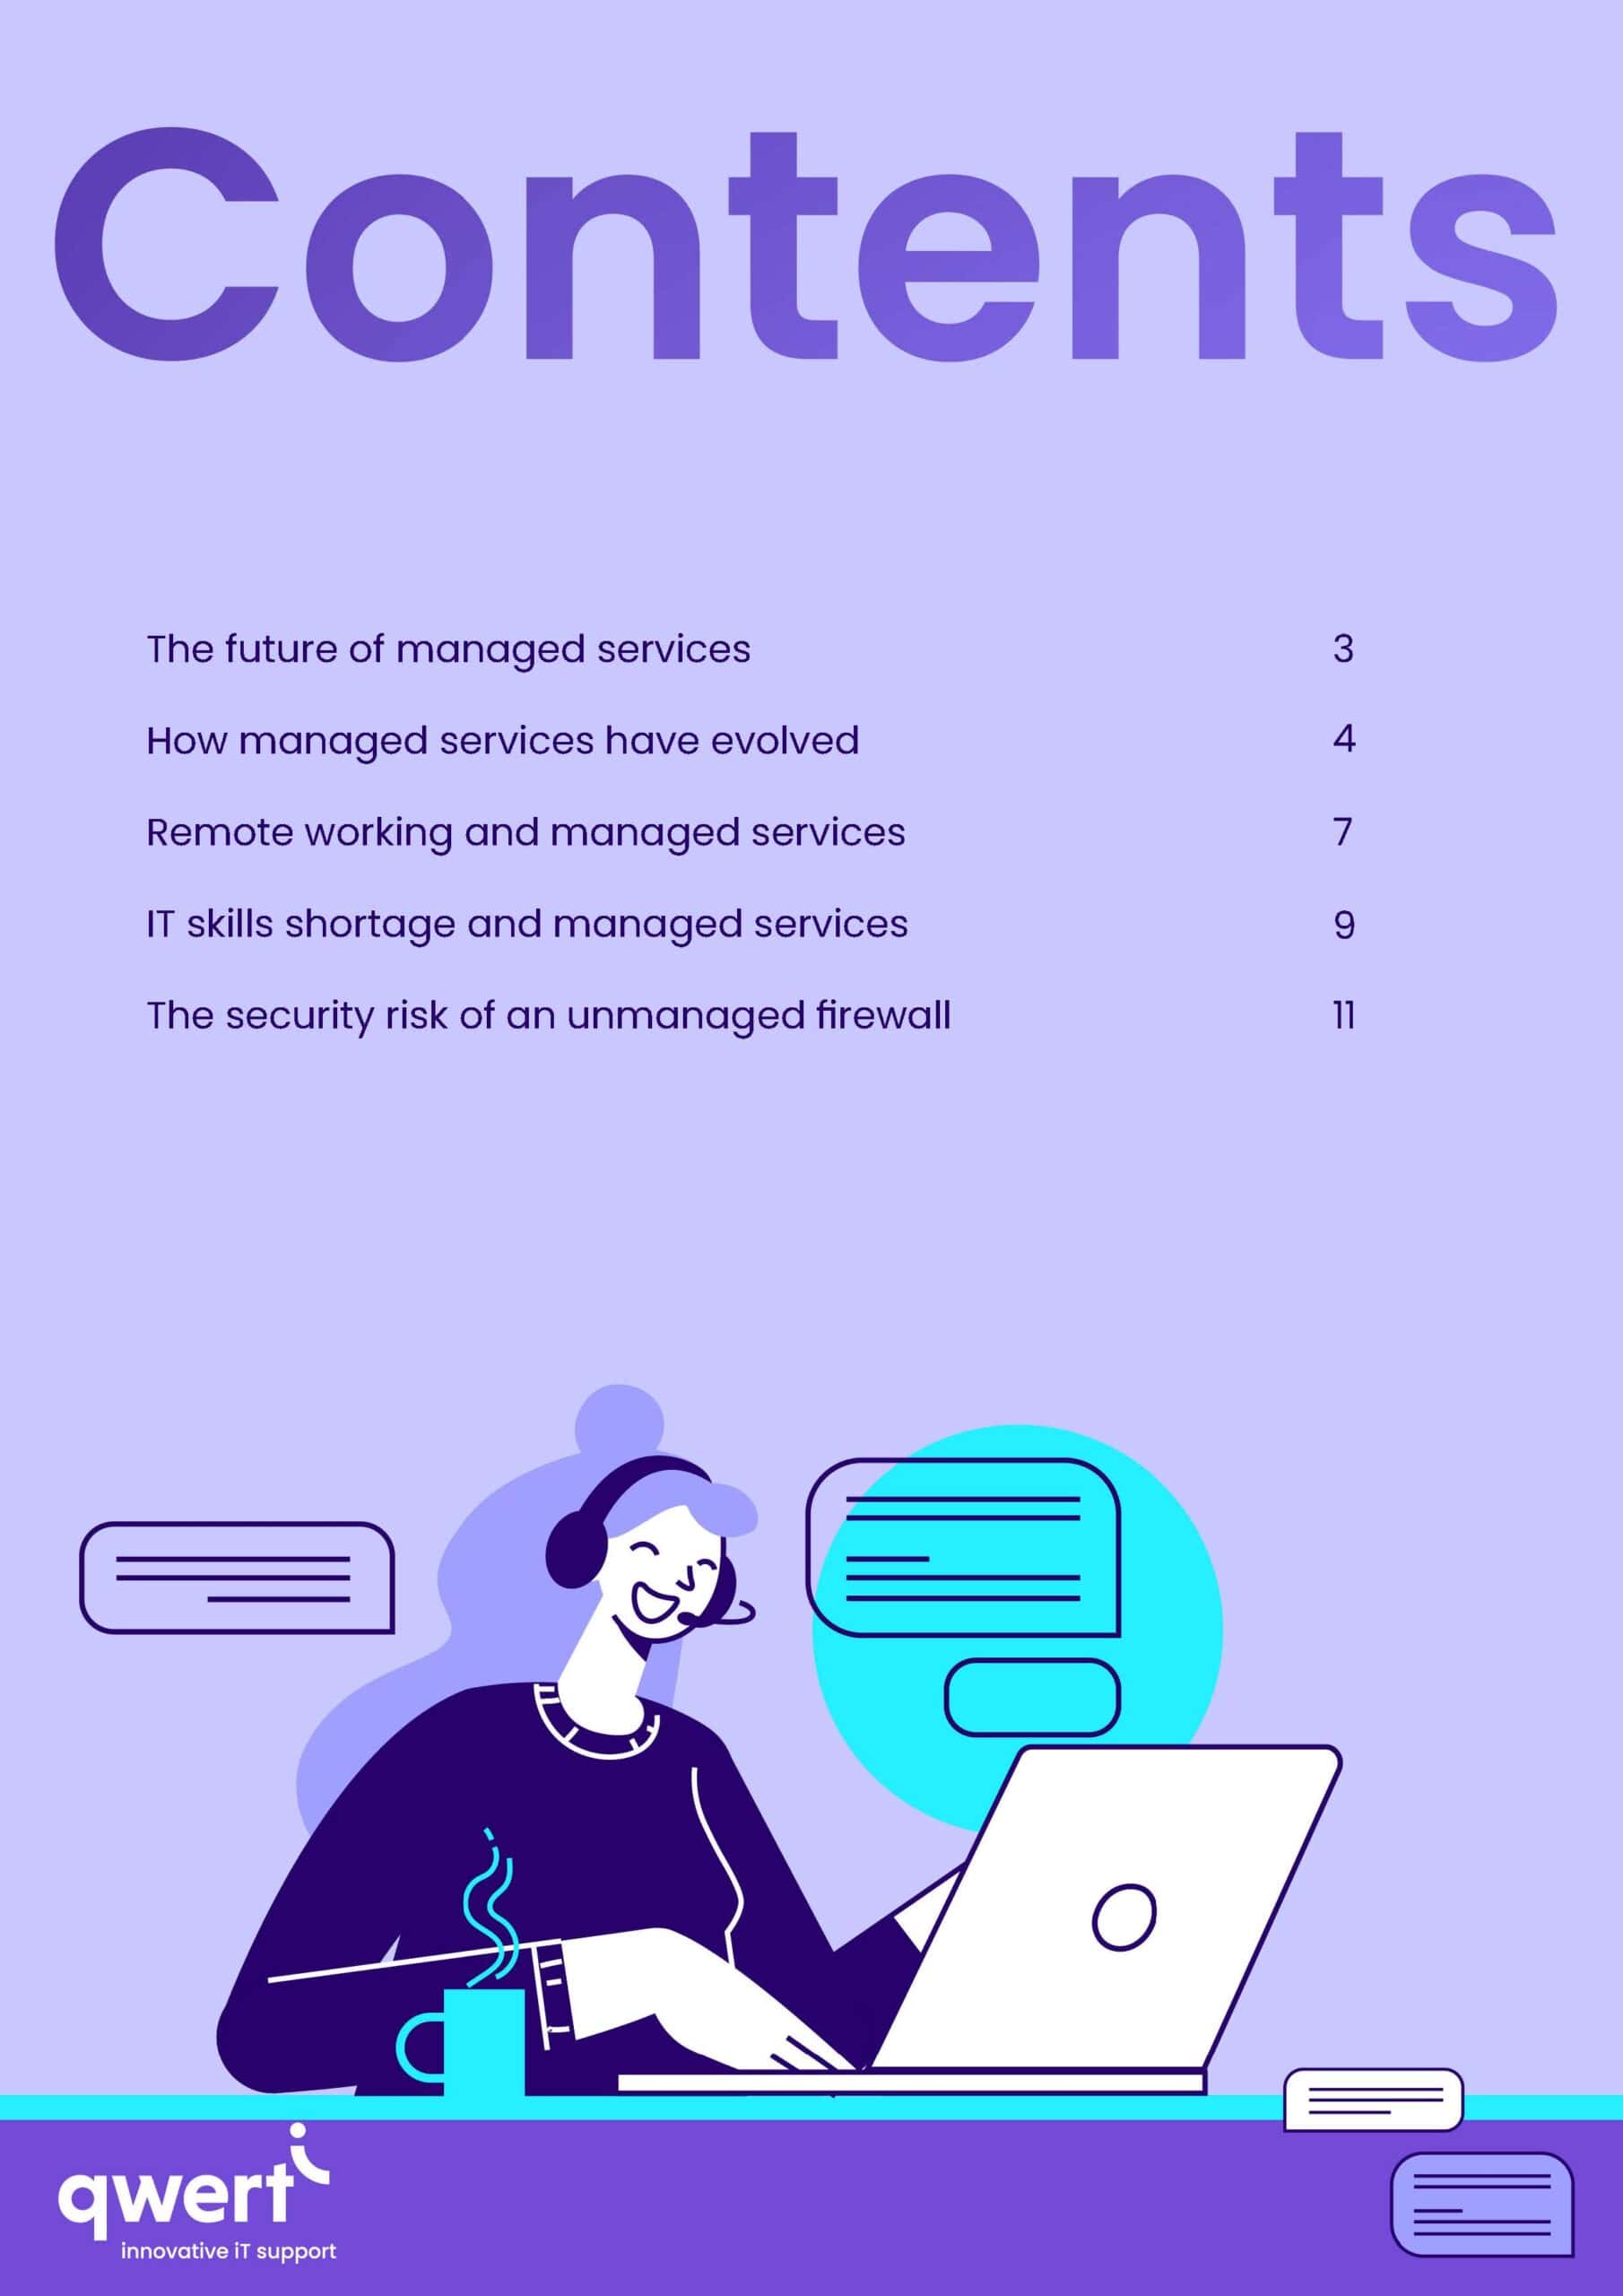 The future of managed services by Qwerti 2